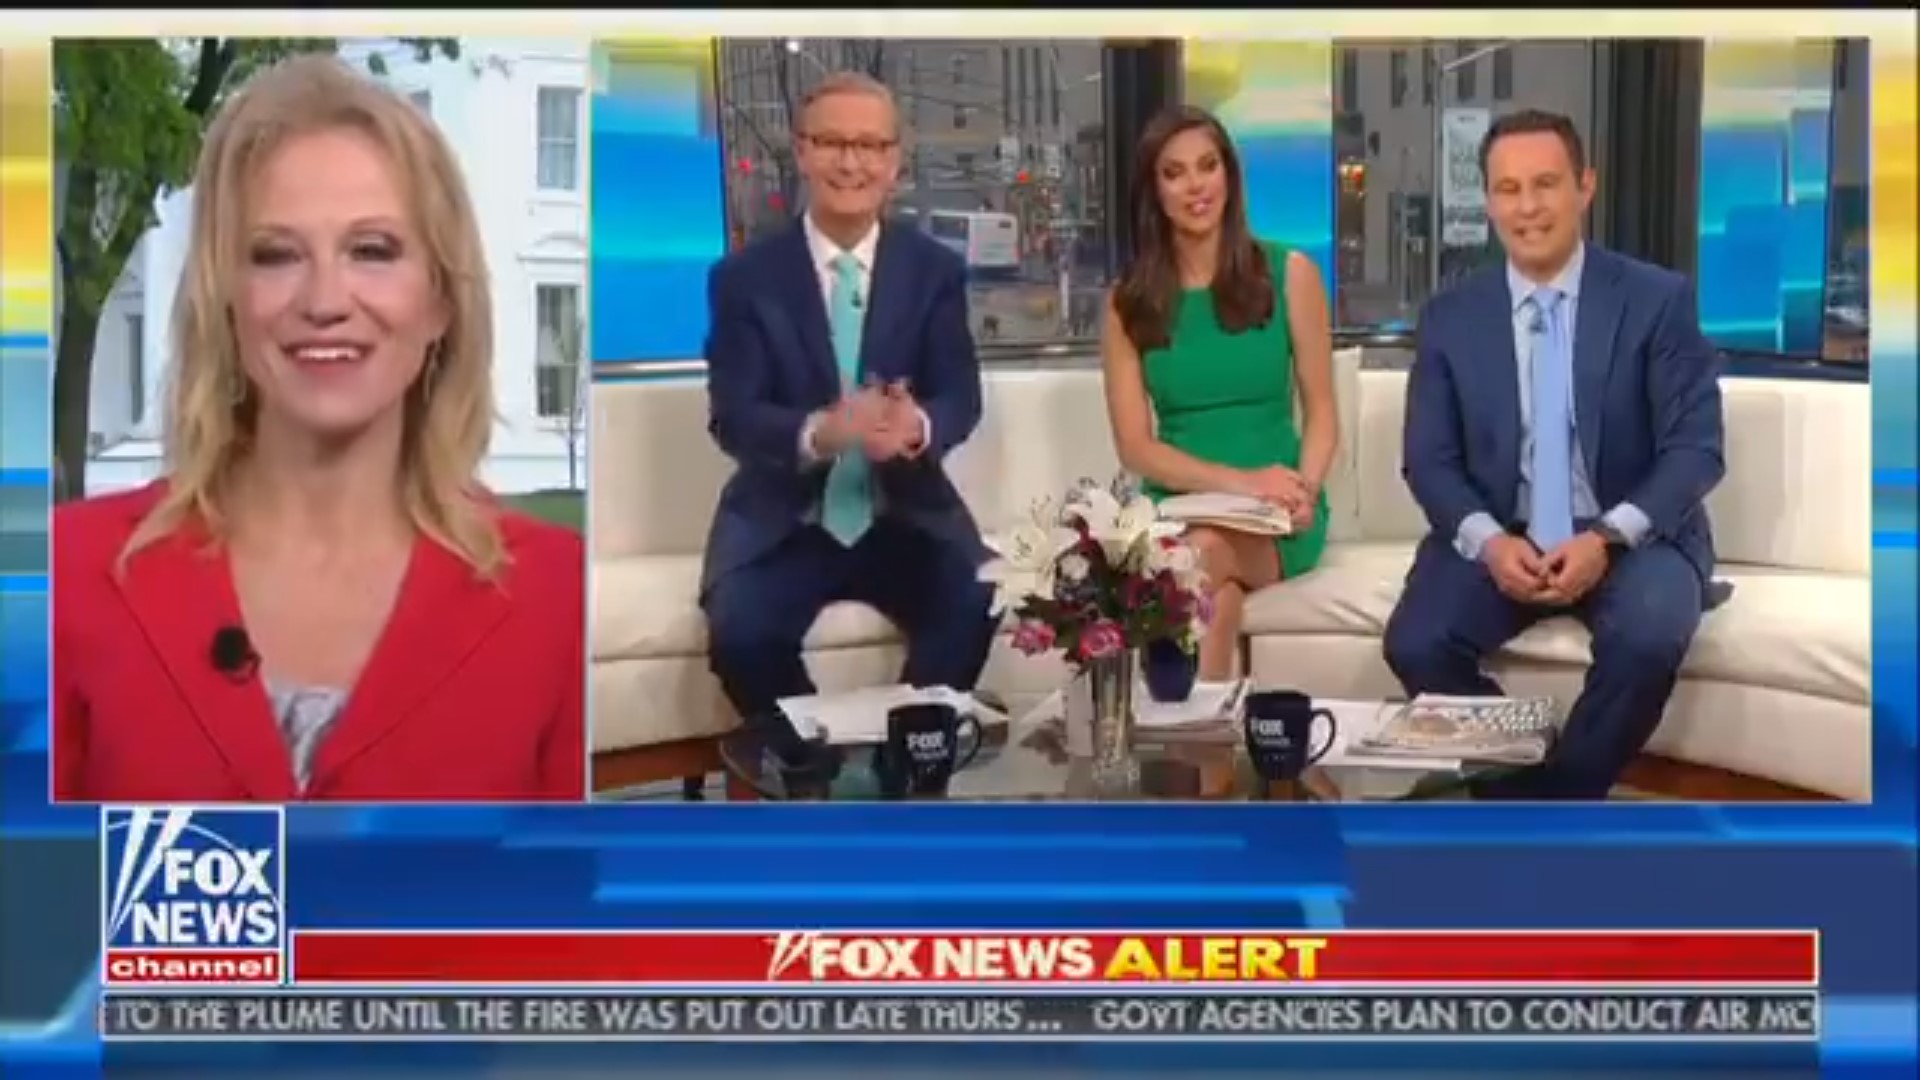 Watch Fox & Friends’ Steve Doocy Shout ‘Wow!’ And Applaud At The Possibility Of Monthly Trump Appearances